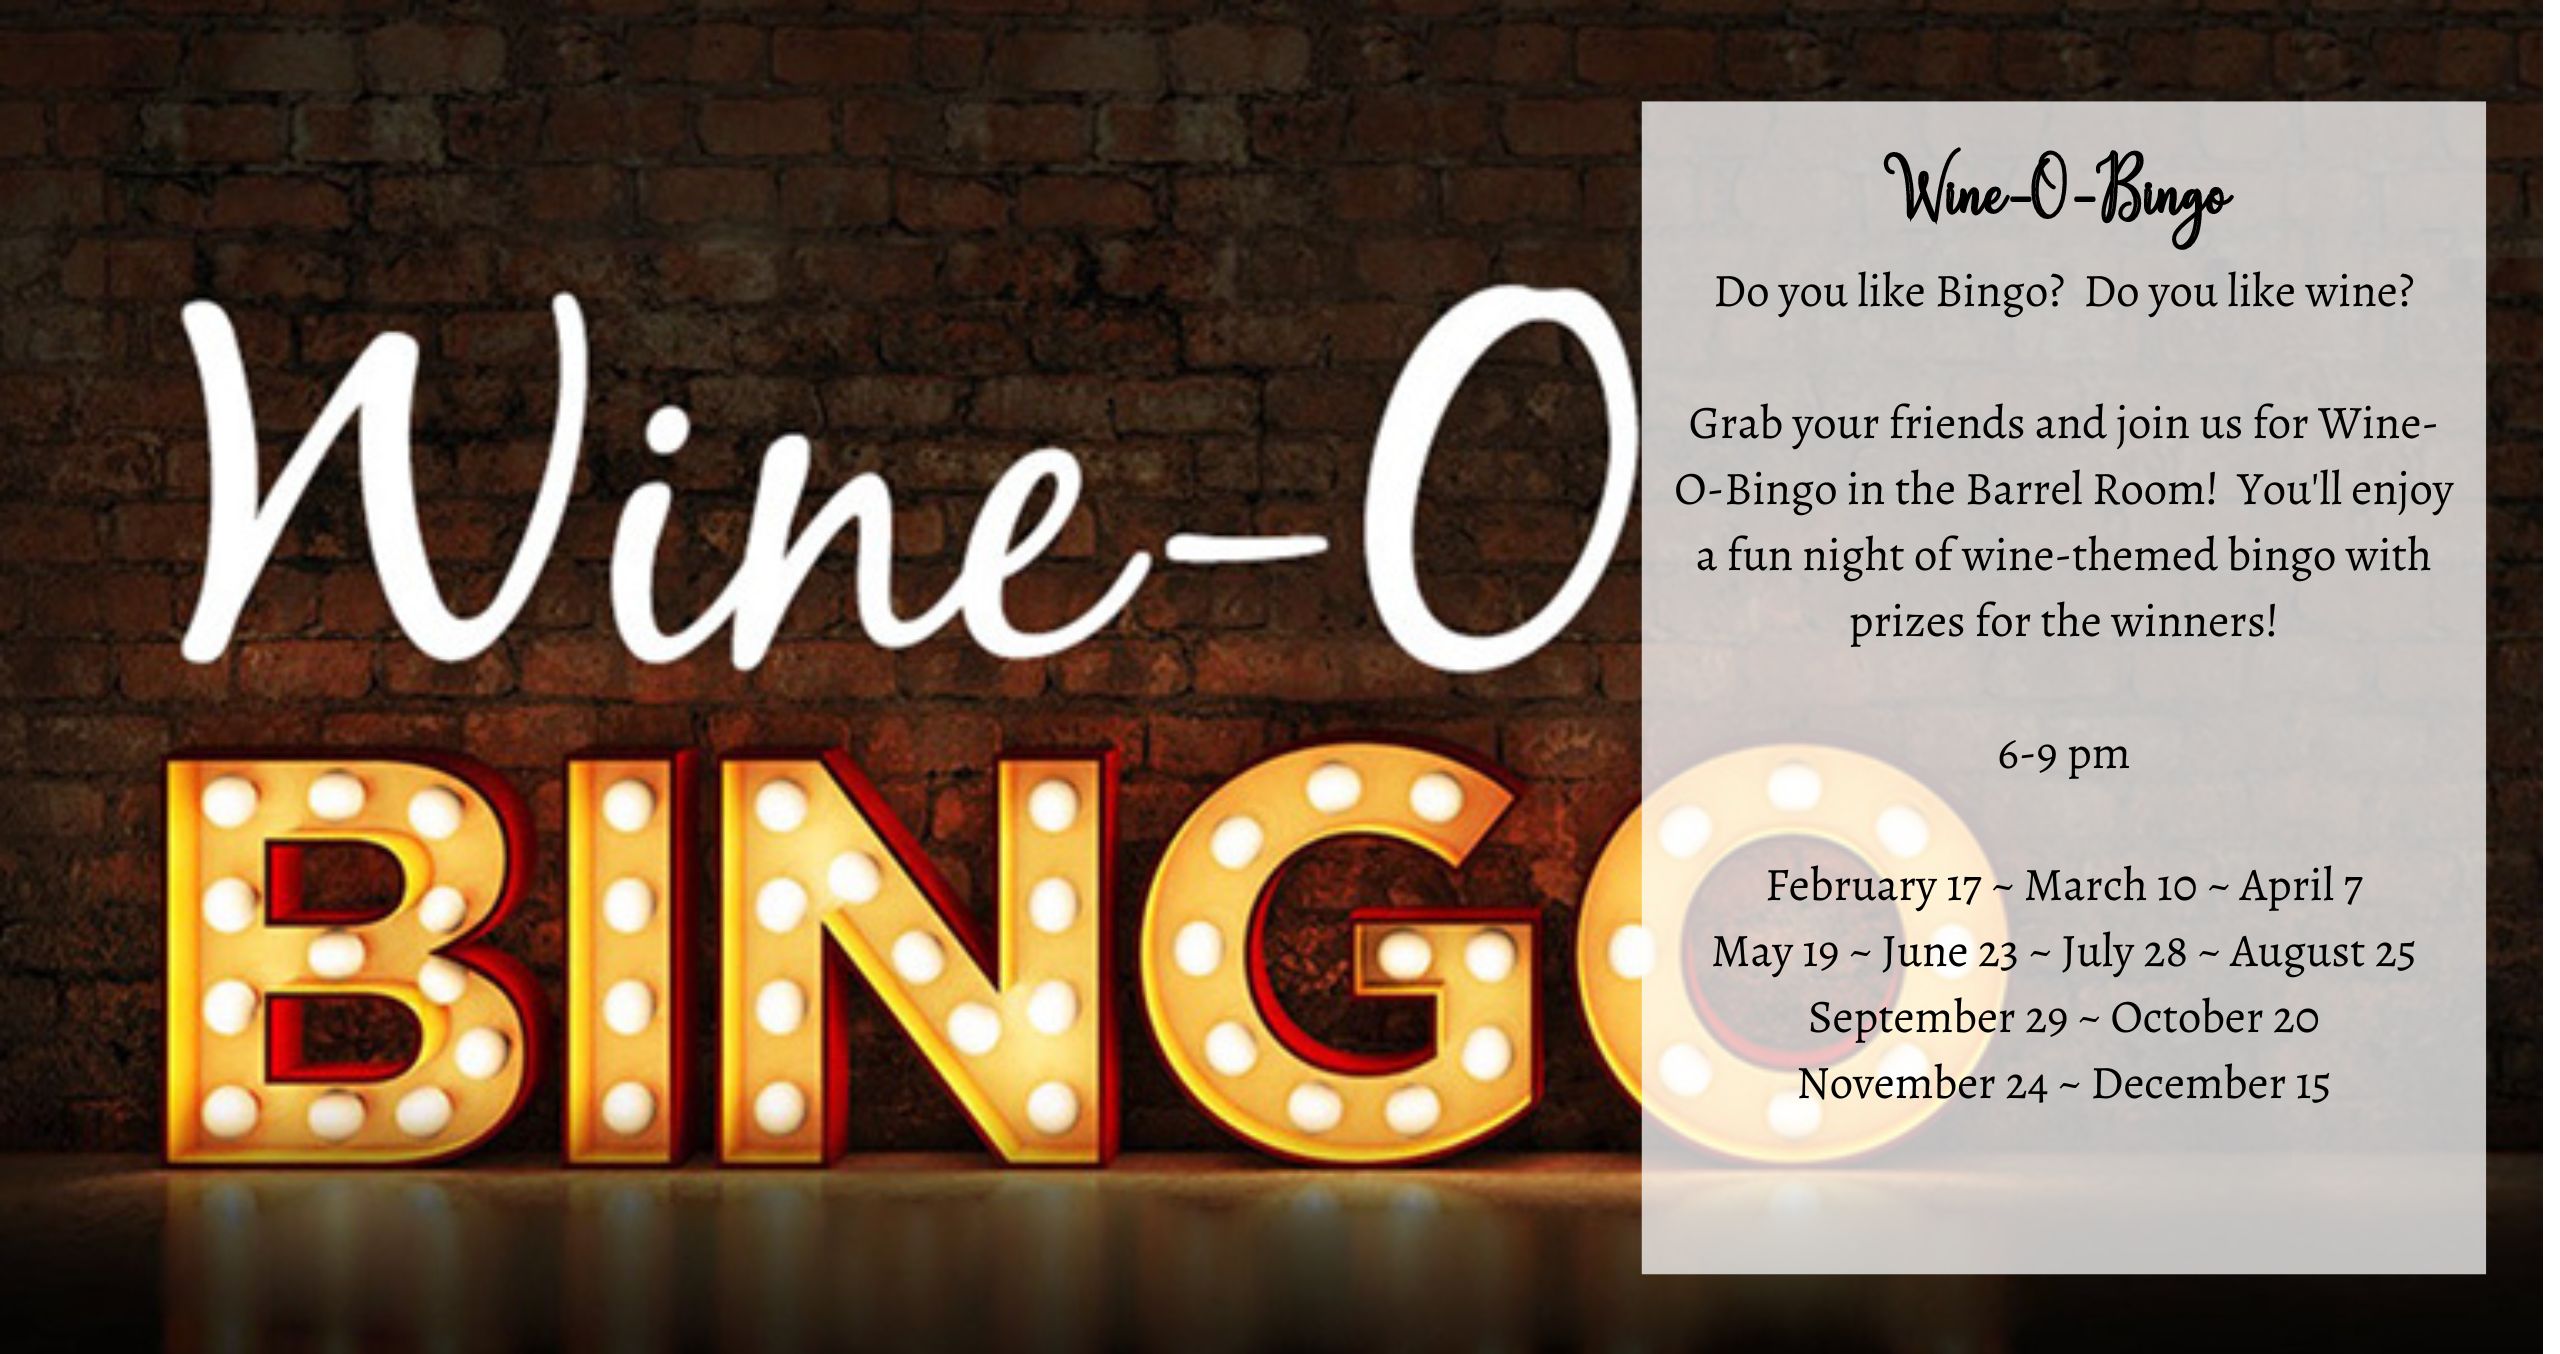 Wine-O-Bingo Details and links to purchase tickets.